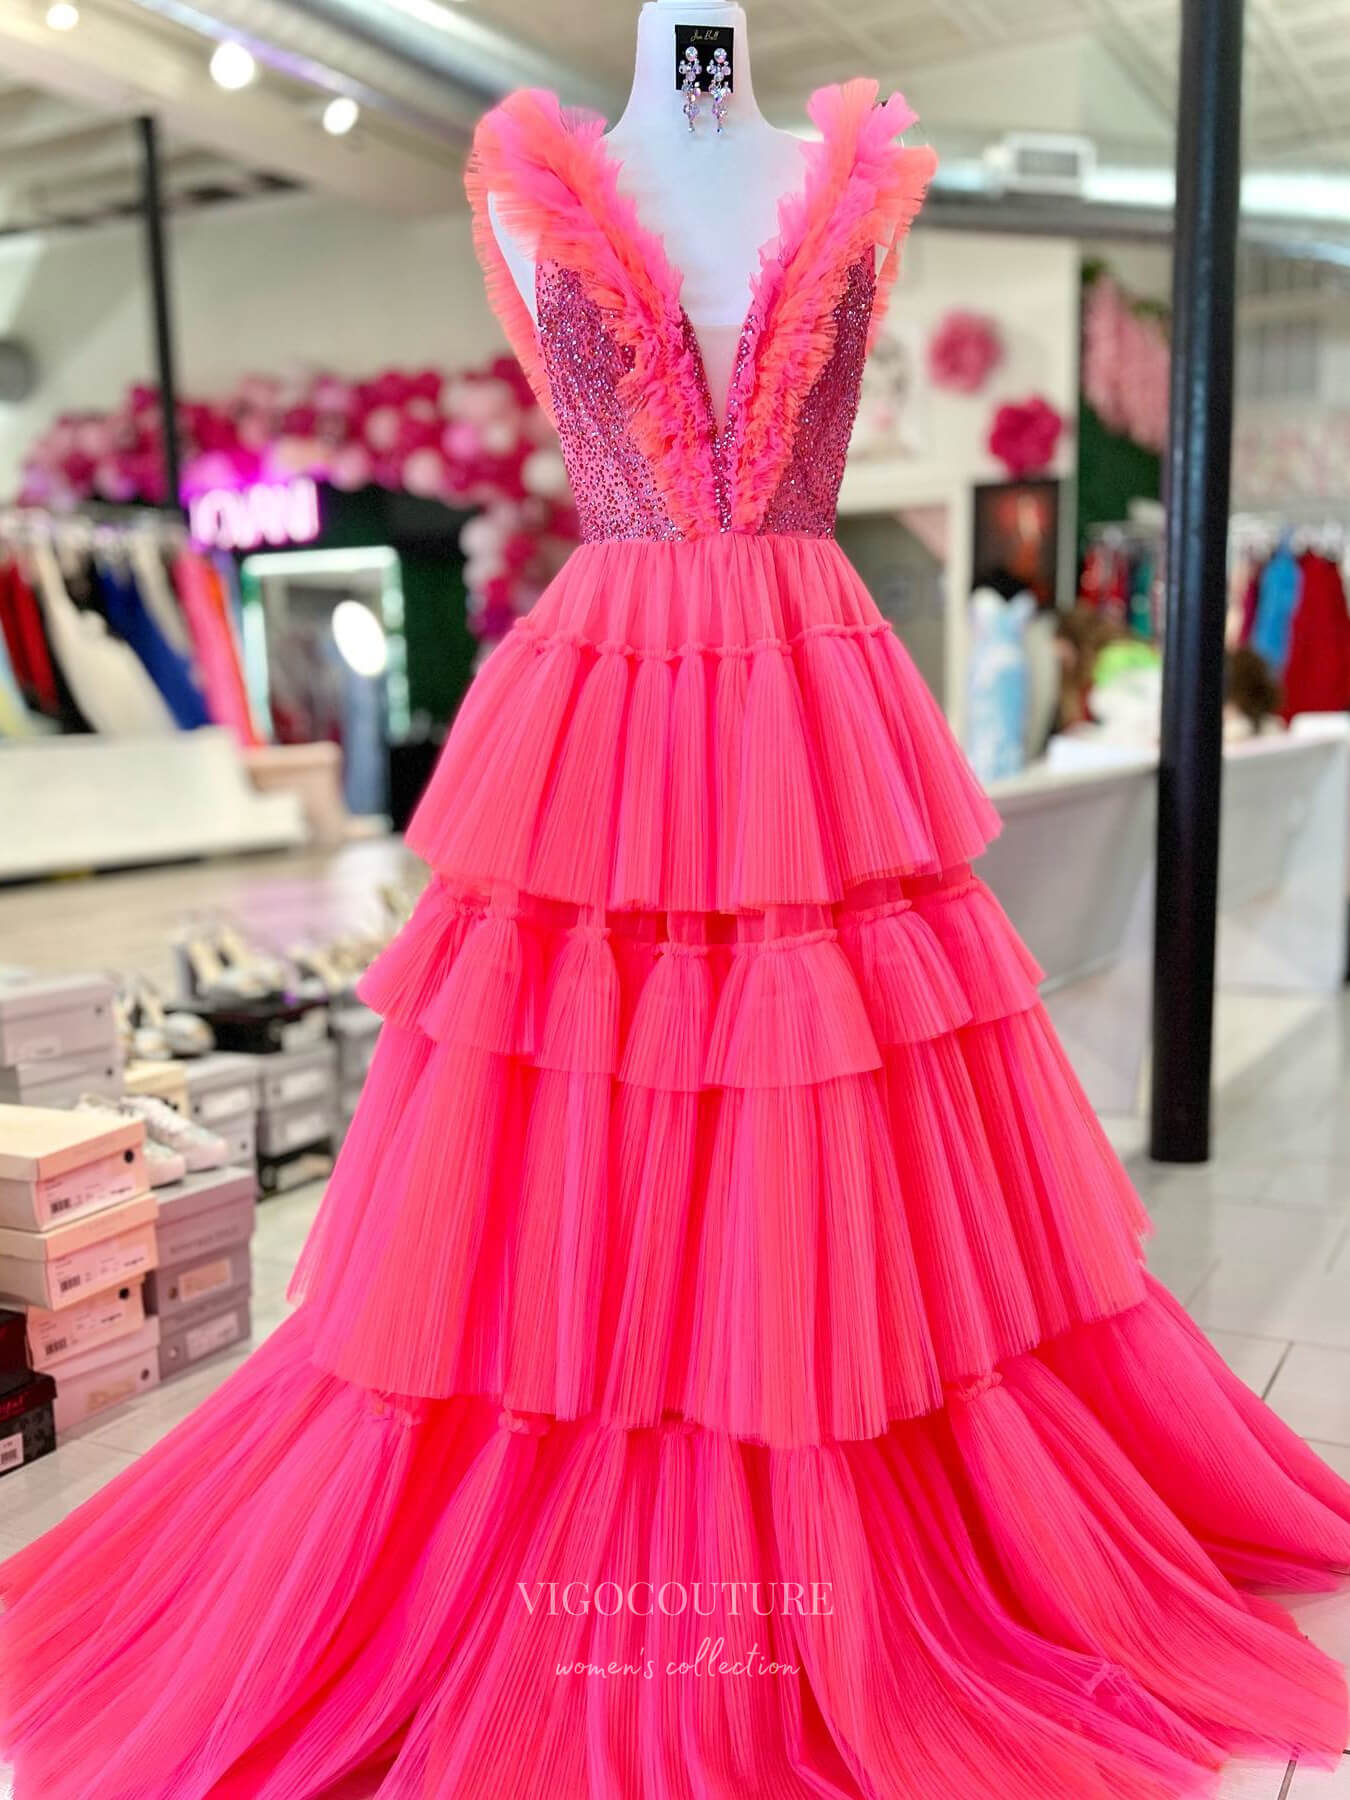 Ruffle Tiered A-Line Prom Dresses Plunging V-Neck Beaded Bodice 24151-Prom Dresses-vigocouture-Hot Pink-Custom Size-vigocouture